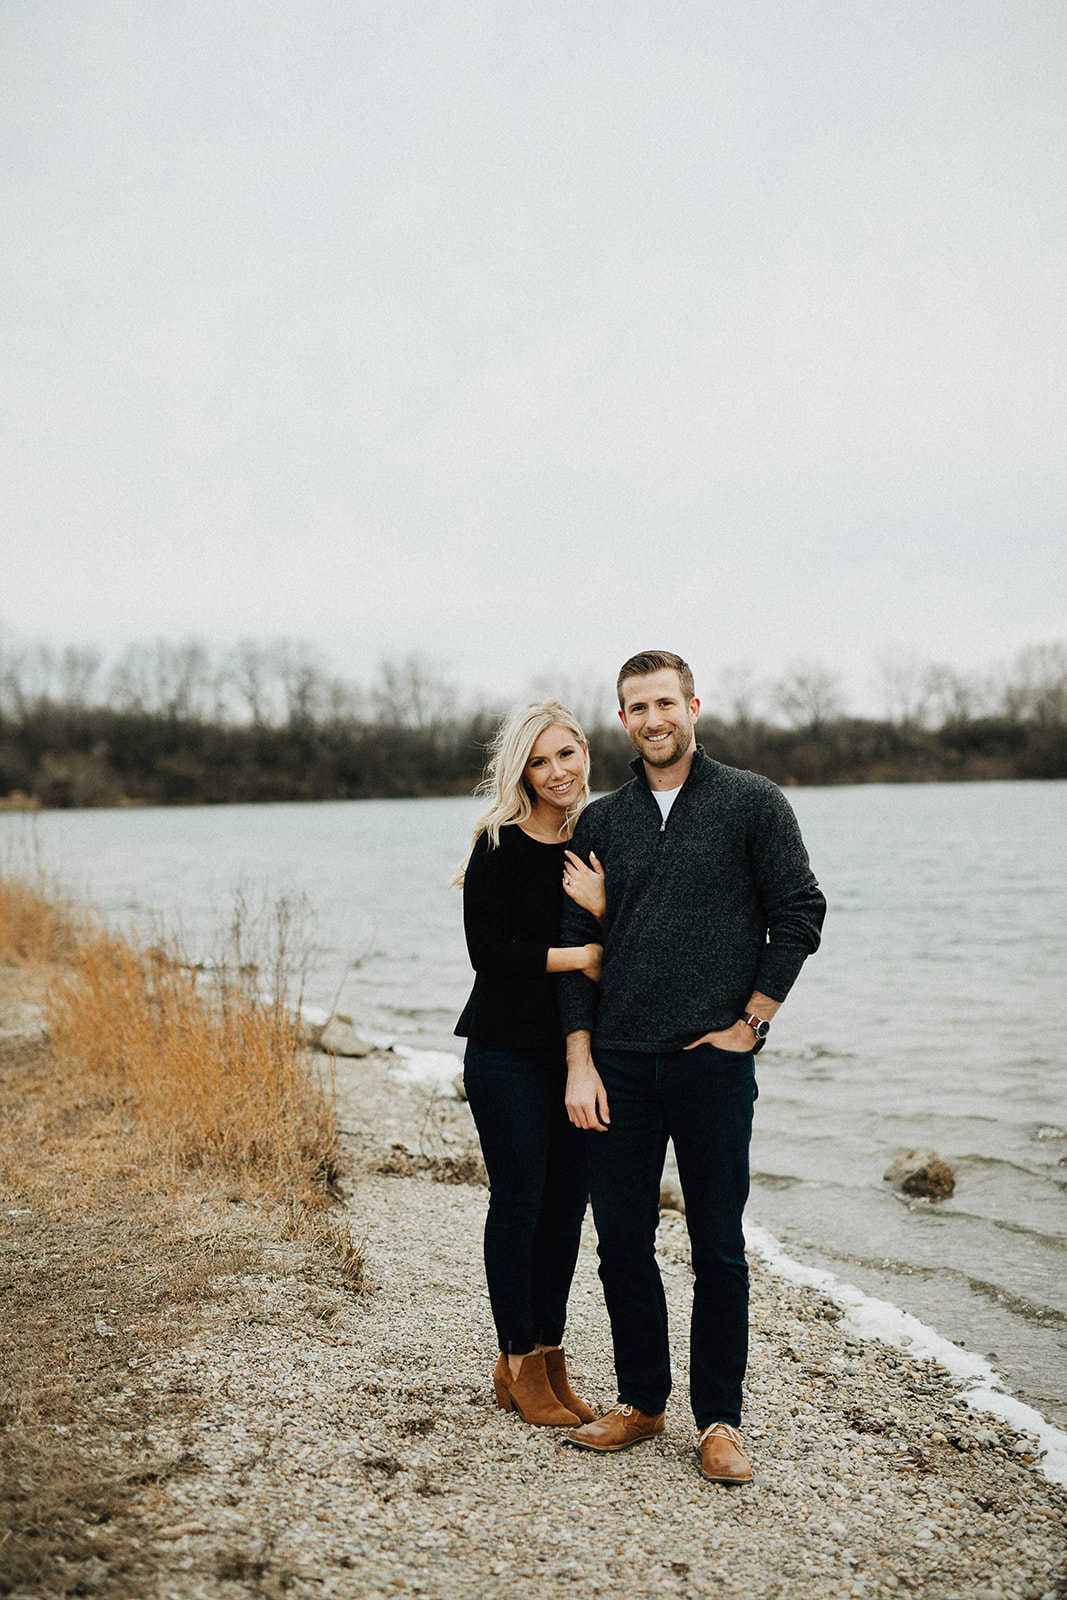 Natural Light Lakeside Engagement Photos with Warm Sunlight